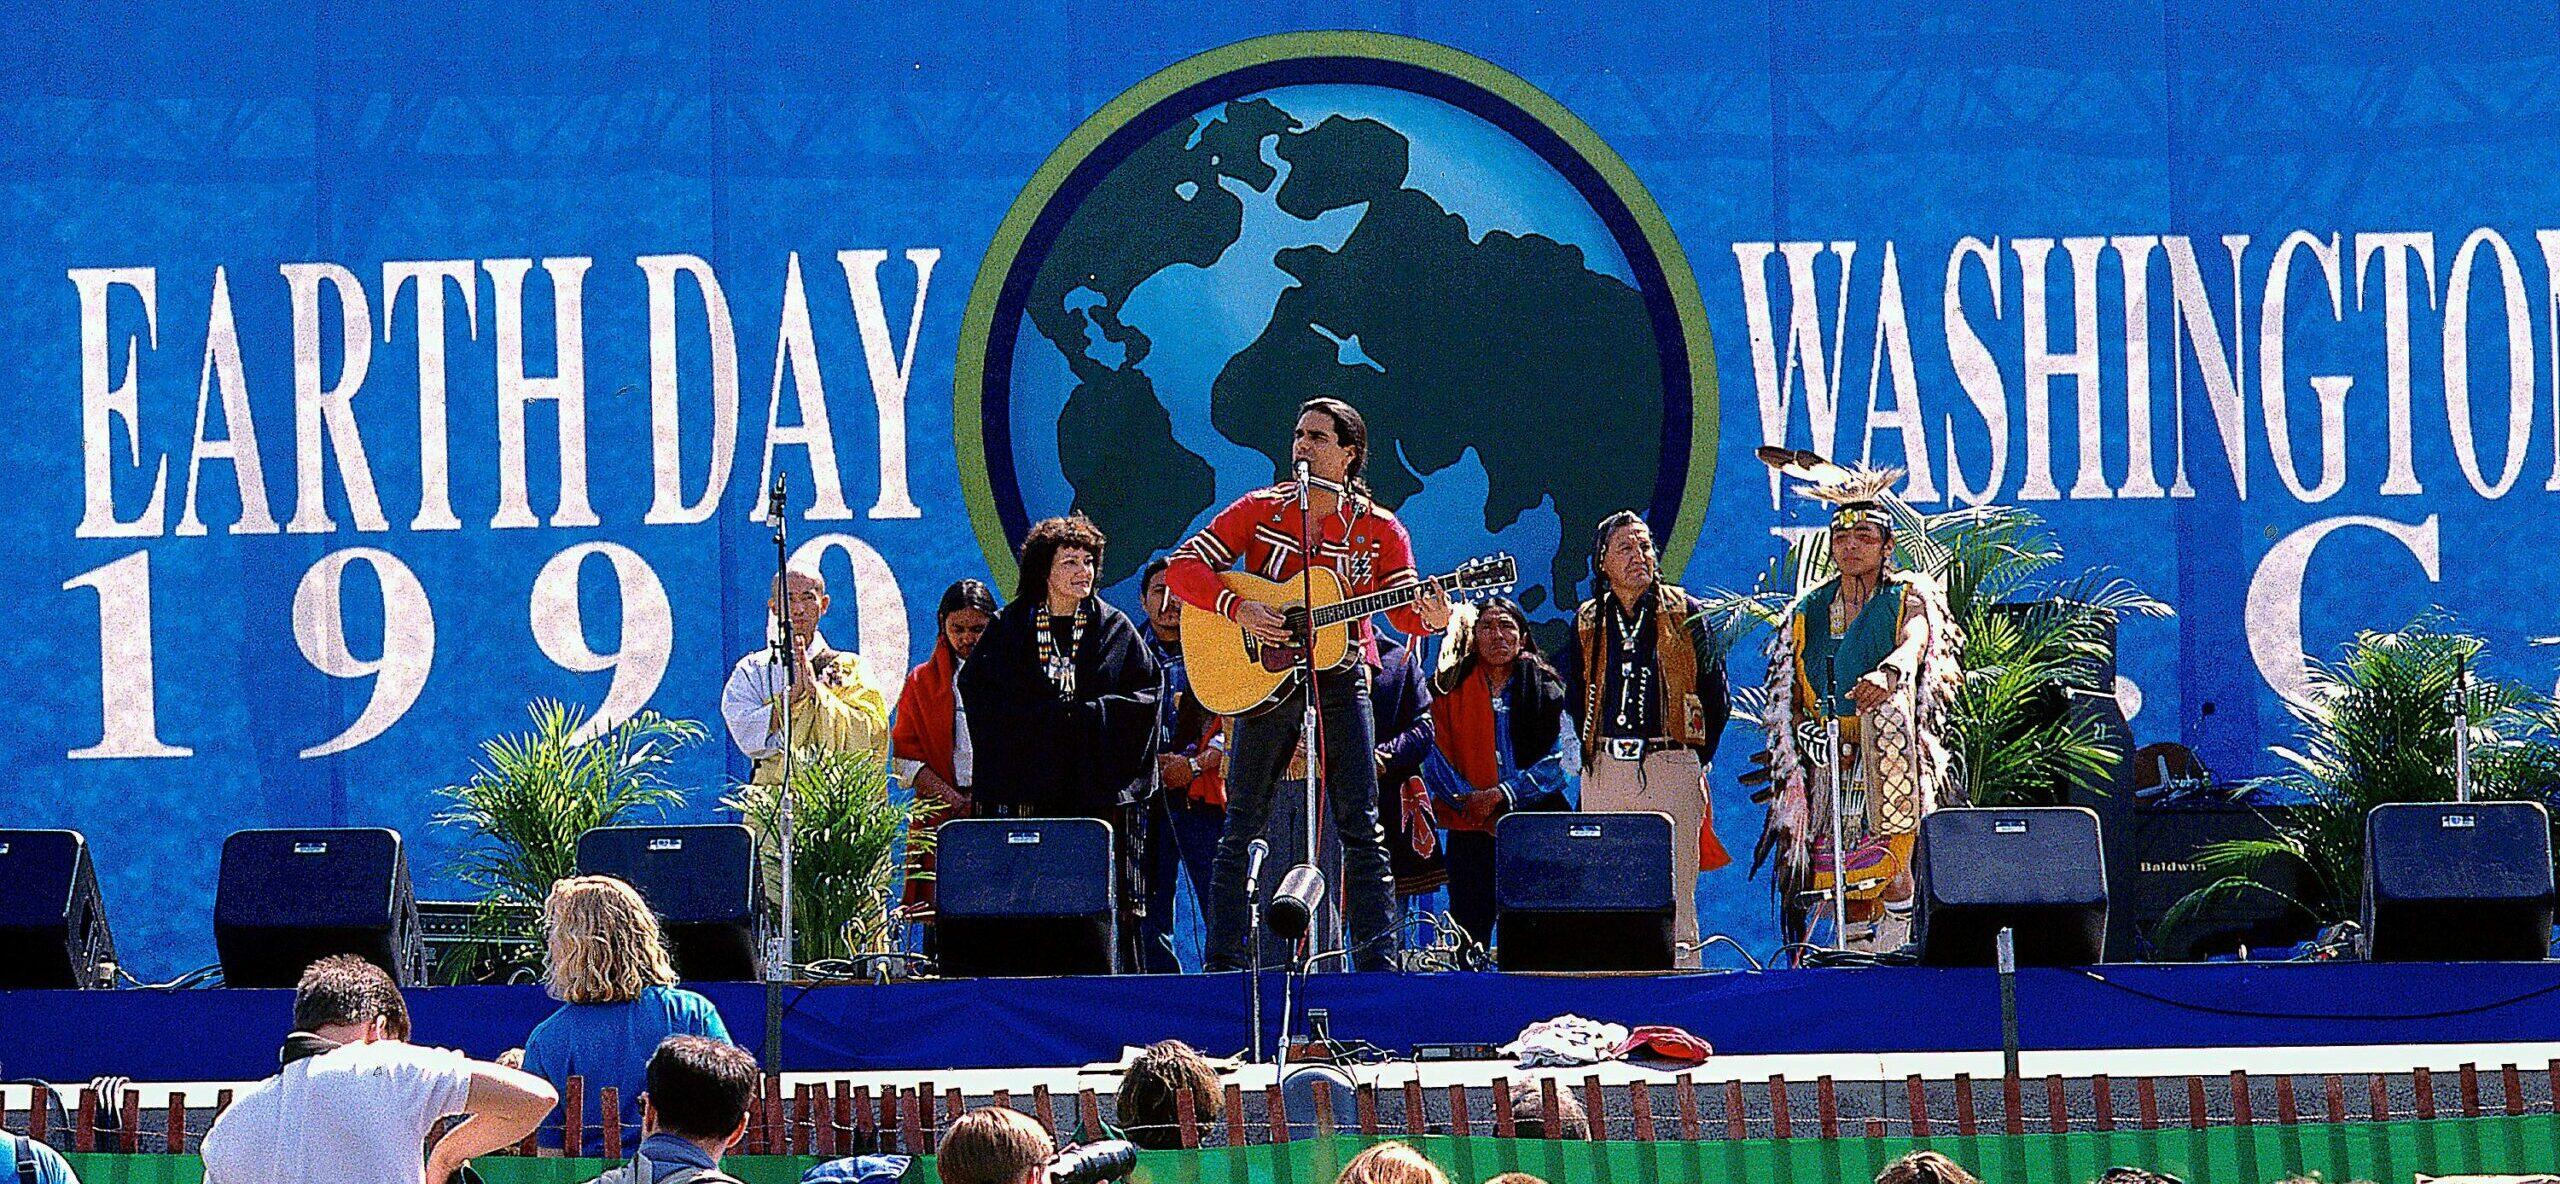 Earth Day Event at the US Capital